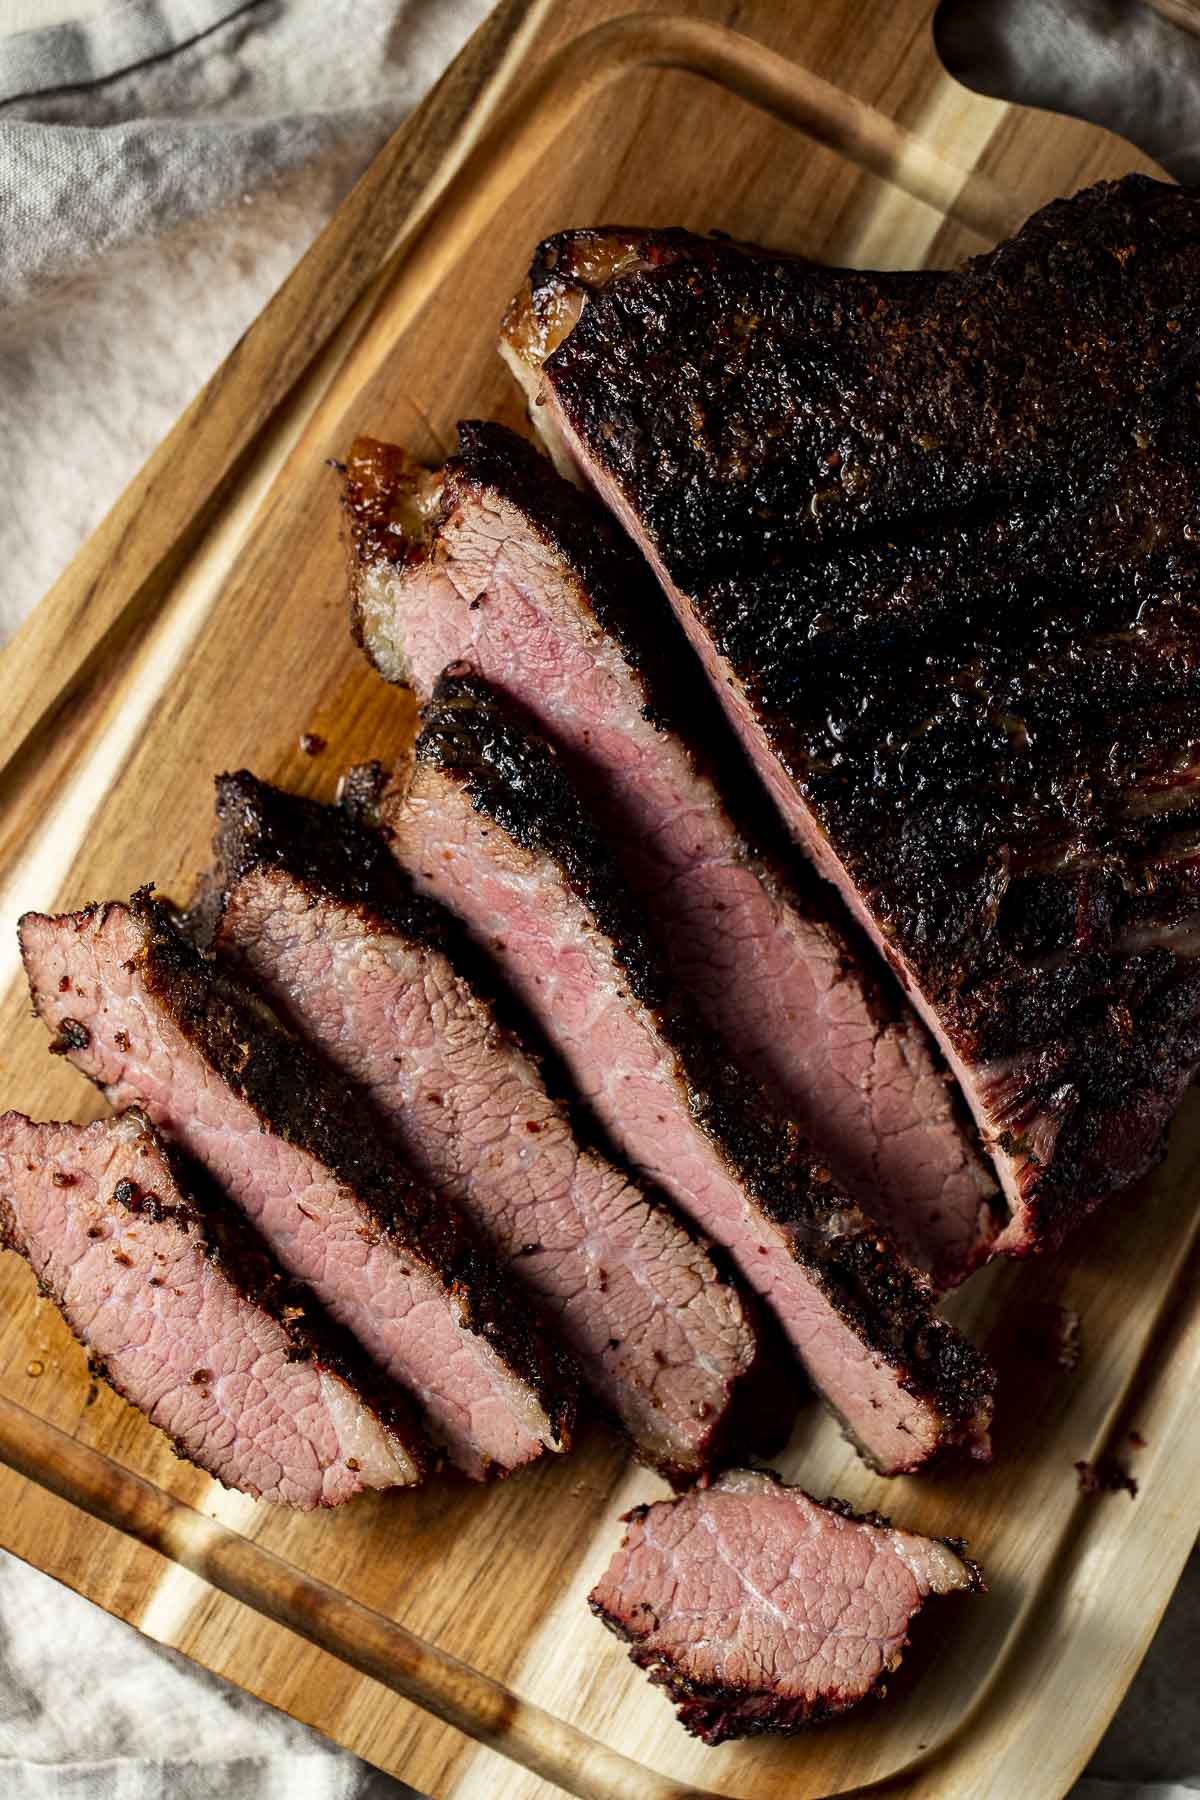 https://www.wenthere8this.com/wp-content/uploads/2021/08/sous-vide-brisket-3.jpg